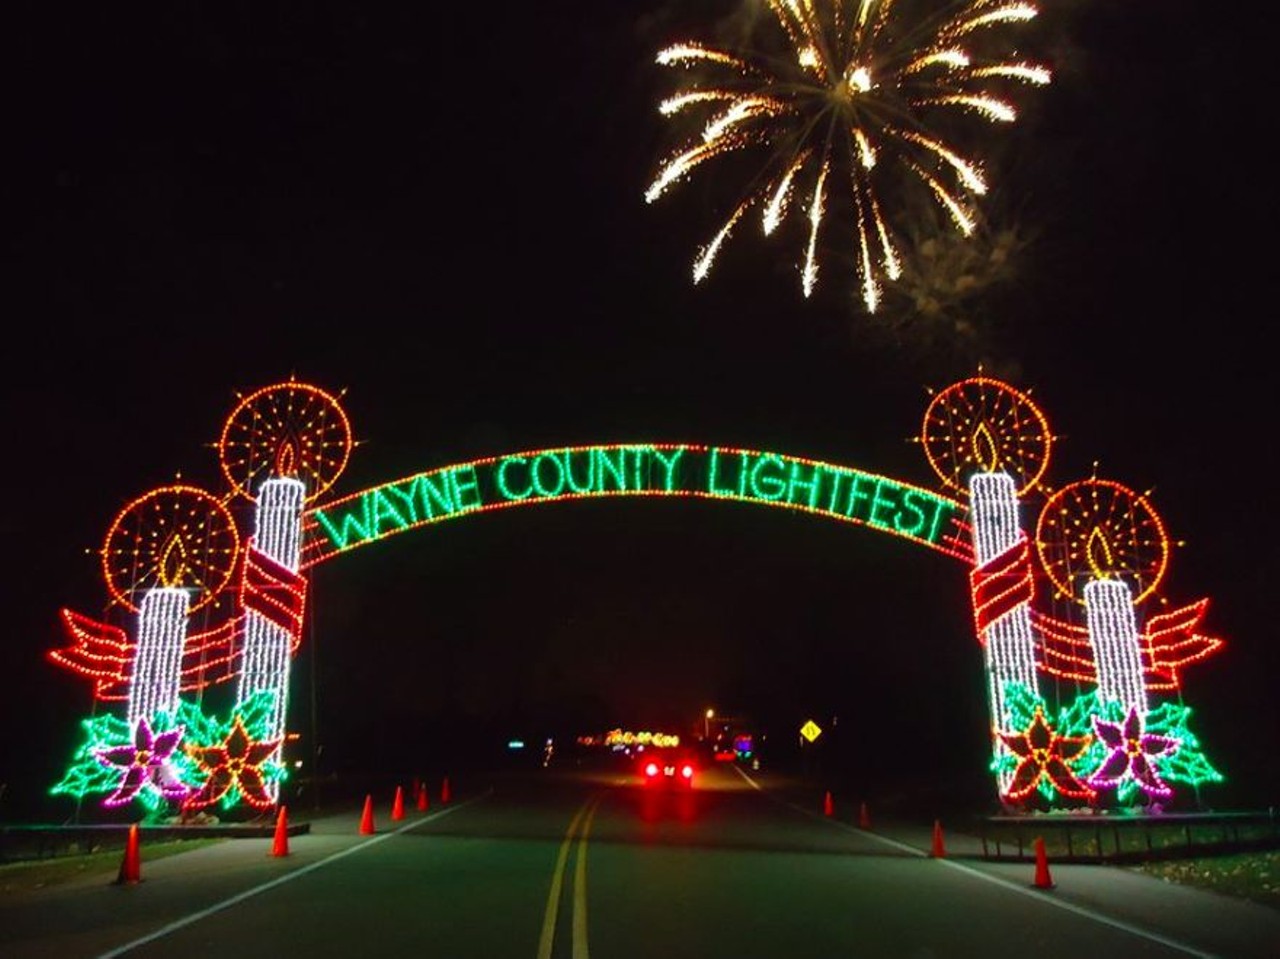 Wayne County Lightfest on Hines Drive
Every year during November and December, Hines Drive is transformed into a winter wonderland. With five miles of colorful displays, it is the Midwest’s longest drive through holiday lights. The lightfest is $5 per car and is open through Christmas Eve.